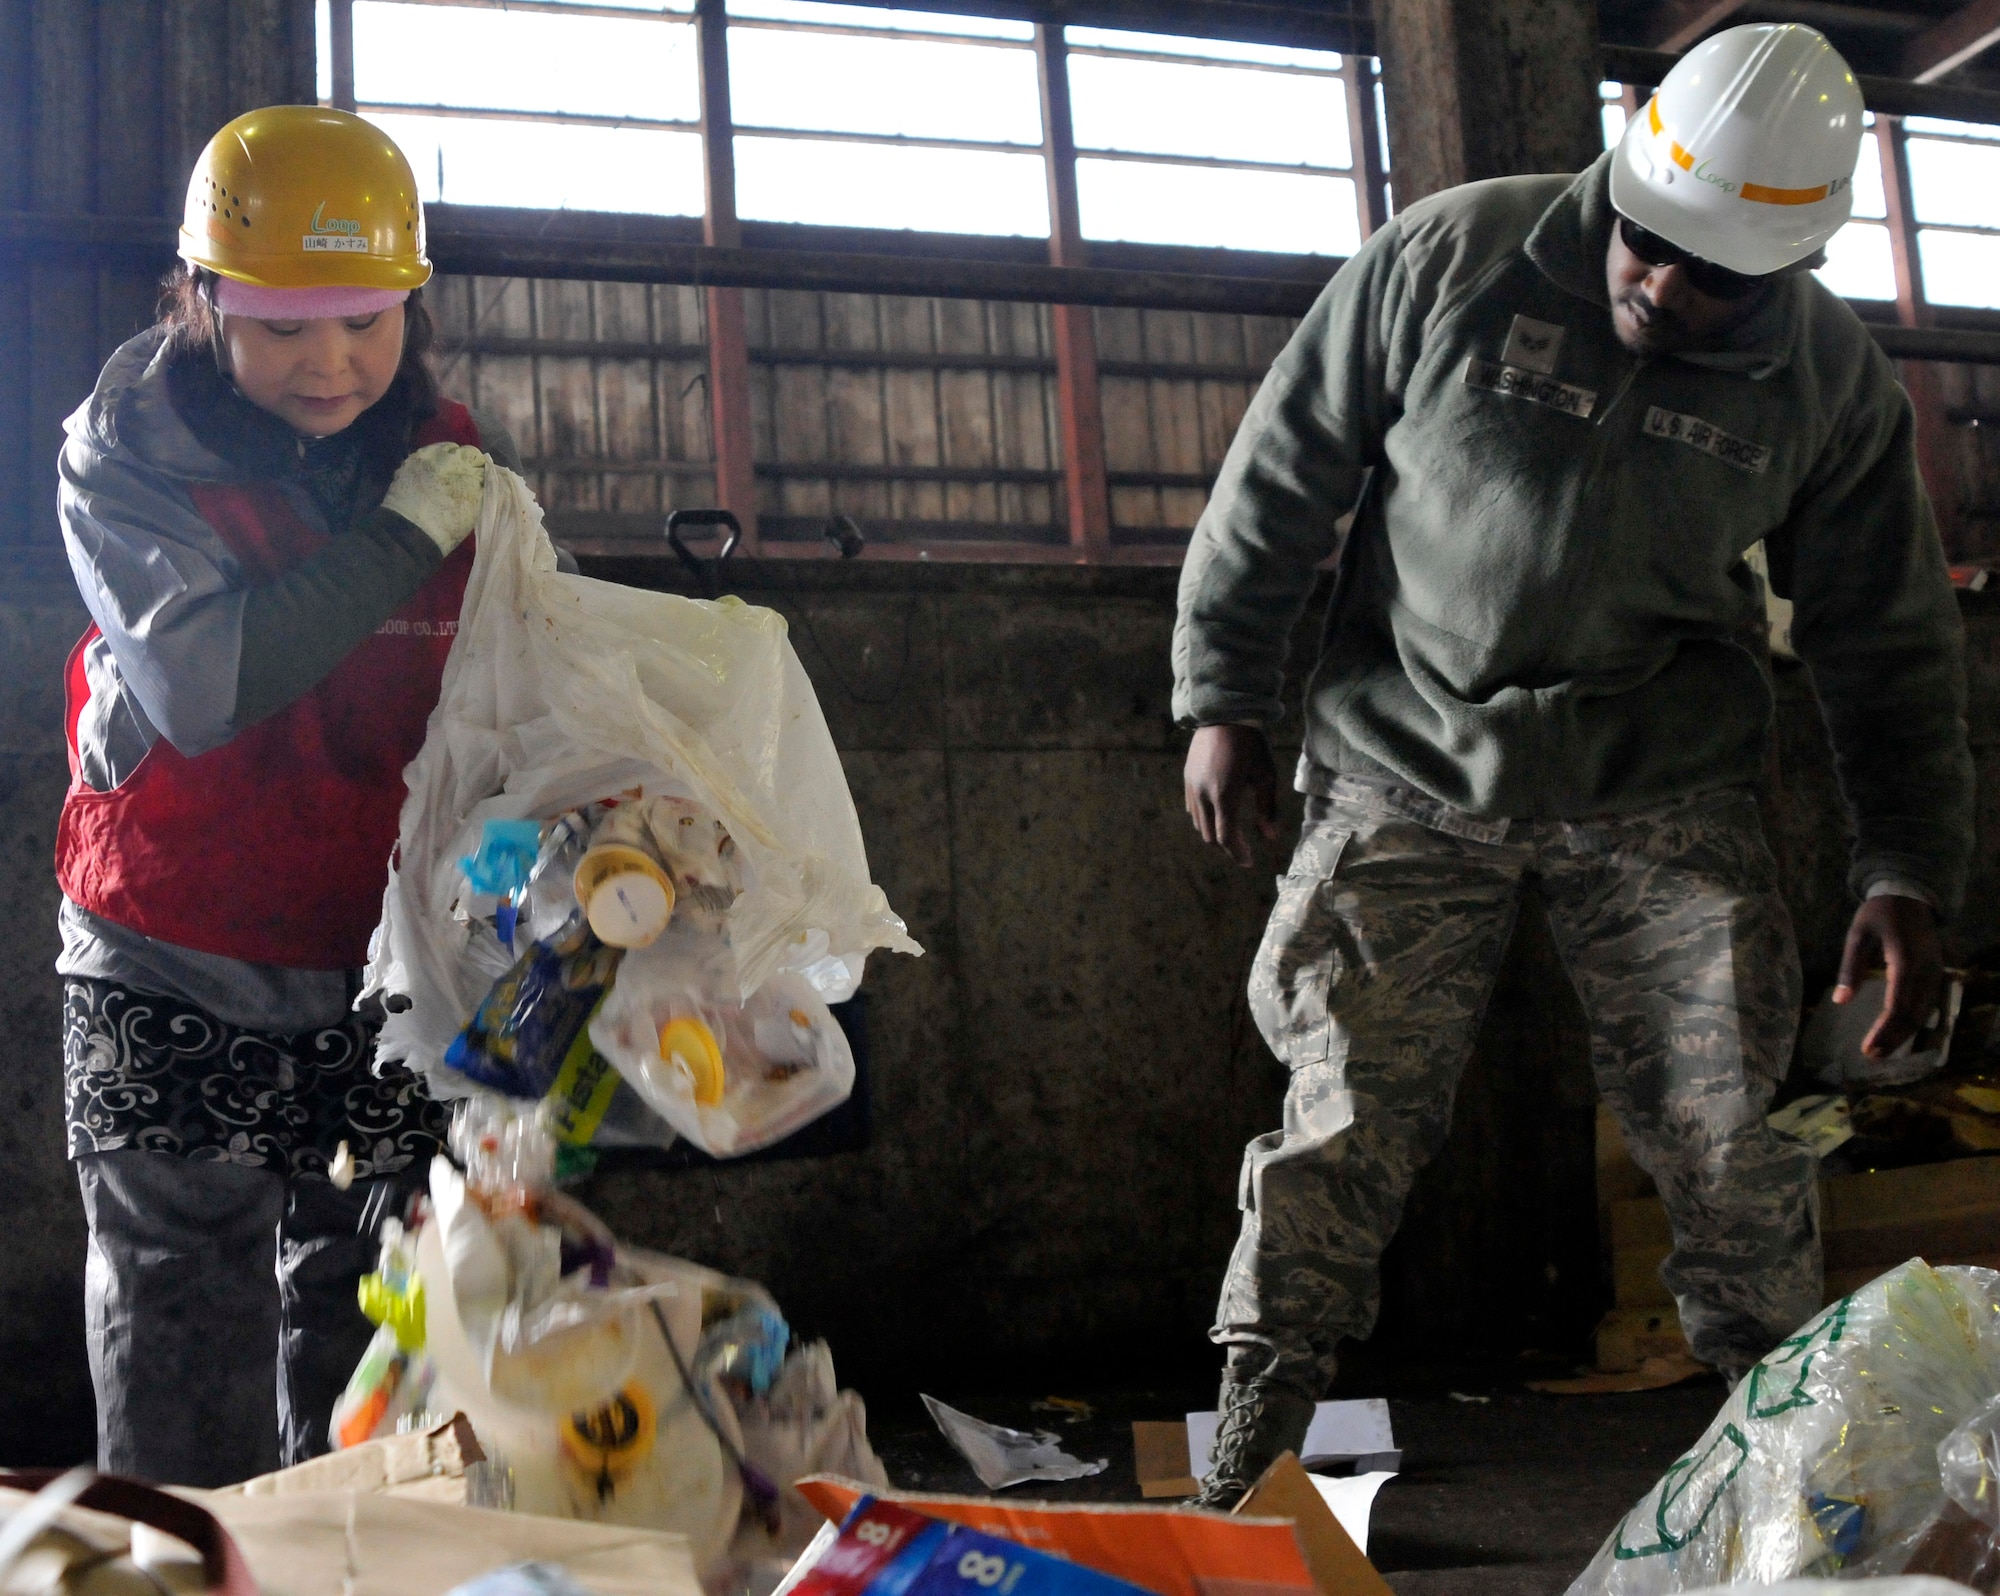 Kasumi Yamazaki, Hosoya Disposal Site assistant manager, pours out a bag of general waste found in a recyclables delivery, while U.S. Air Force Senior Airman David Washington, 35th Civil Engineer Squadron recycling manager, looks on in Misawa City, Japan, Feb. 28, 2013. Recycling managers from Misawa Air Base perform inspections at the disposal site to ensure proper recycling techniques are being followed. Hosoya is the final stop for all of the base’s trash and recyclables. (U.S. Air Force photo by Tech. Sgt. Phillip Butterfield) 